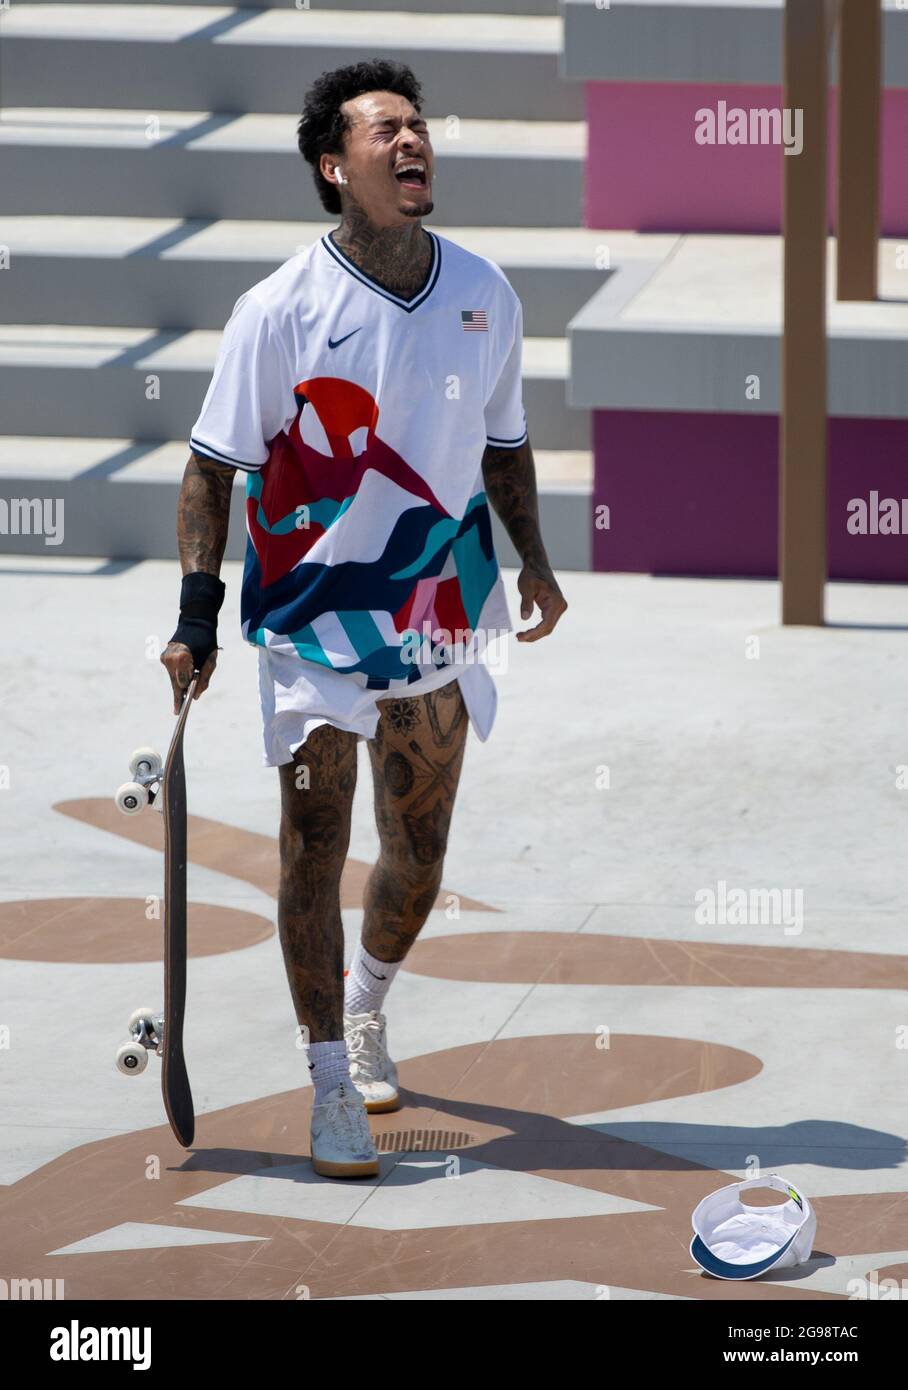 Tokyo, Japan. 25th July, 2021. Nyjah Huston of USA competes in the Men's  Street Skateboarding during the Tokyo 2020 Olympics at the Aomi Urban  Sports Park on Sunday, July 25, 2021 in